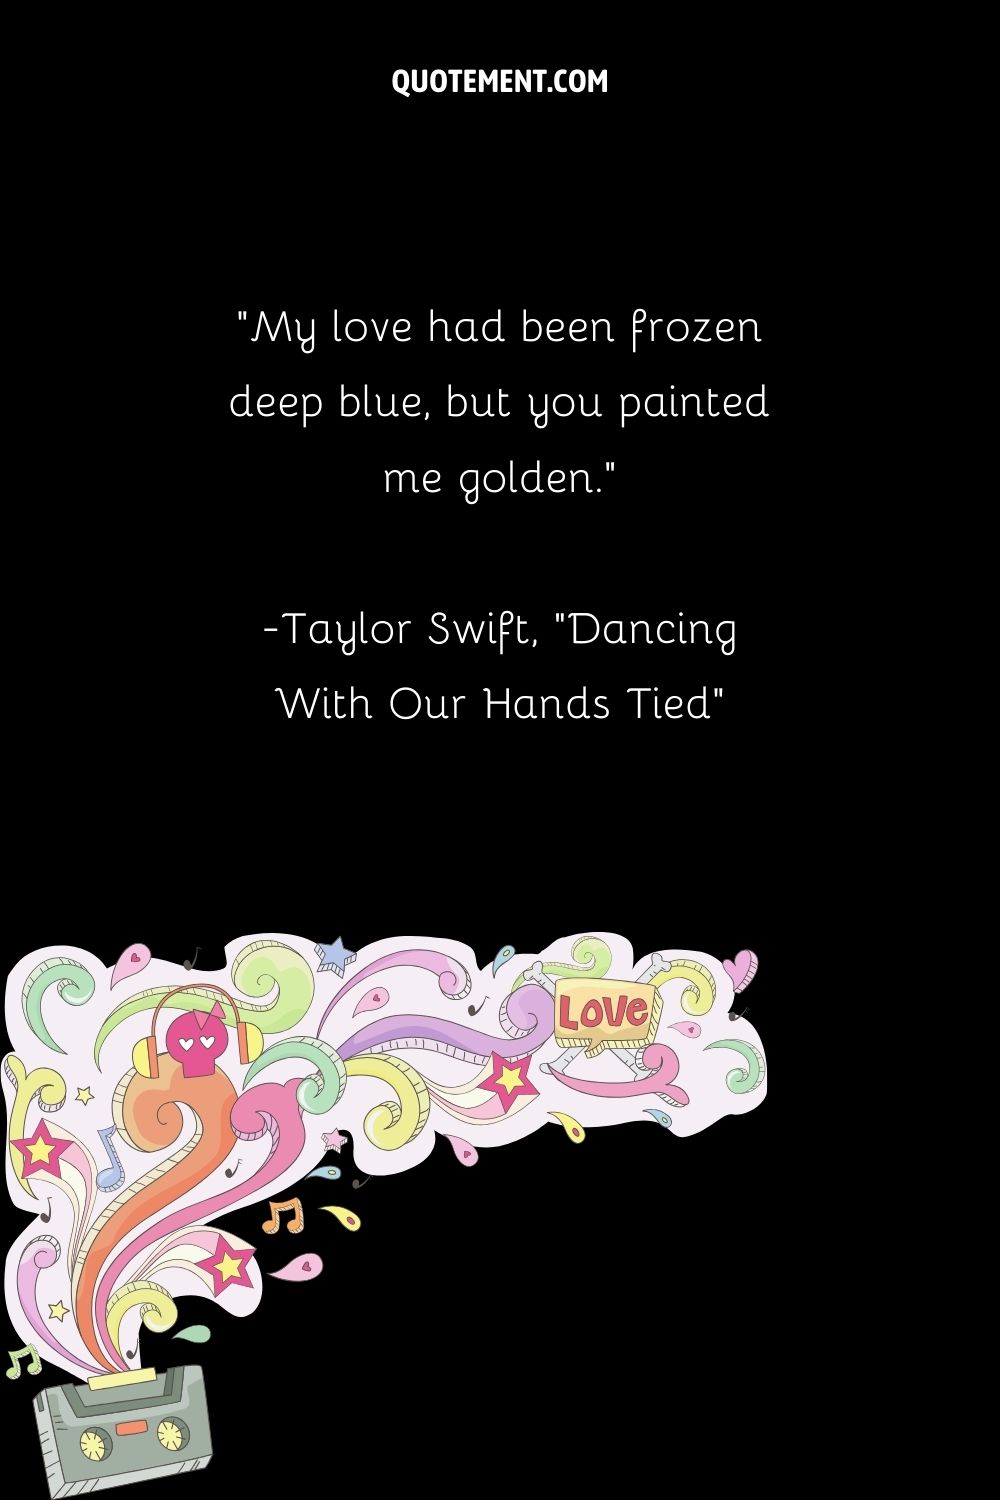 My love had been frozen deep blue, but you painted me golden. — Taylor Swift, Dancing With Our Hands Tied